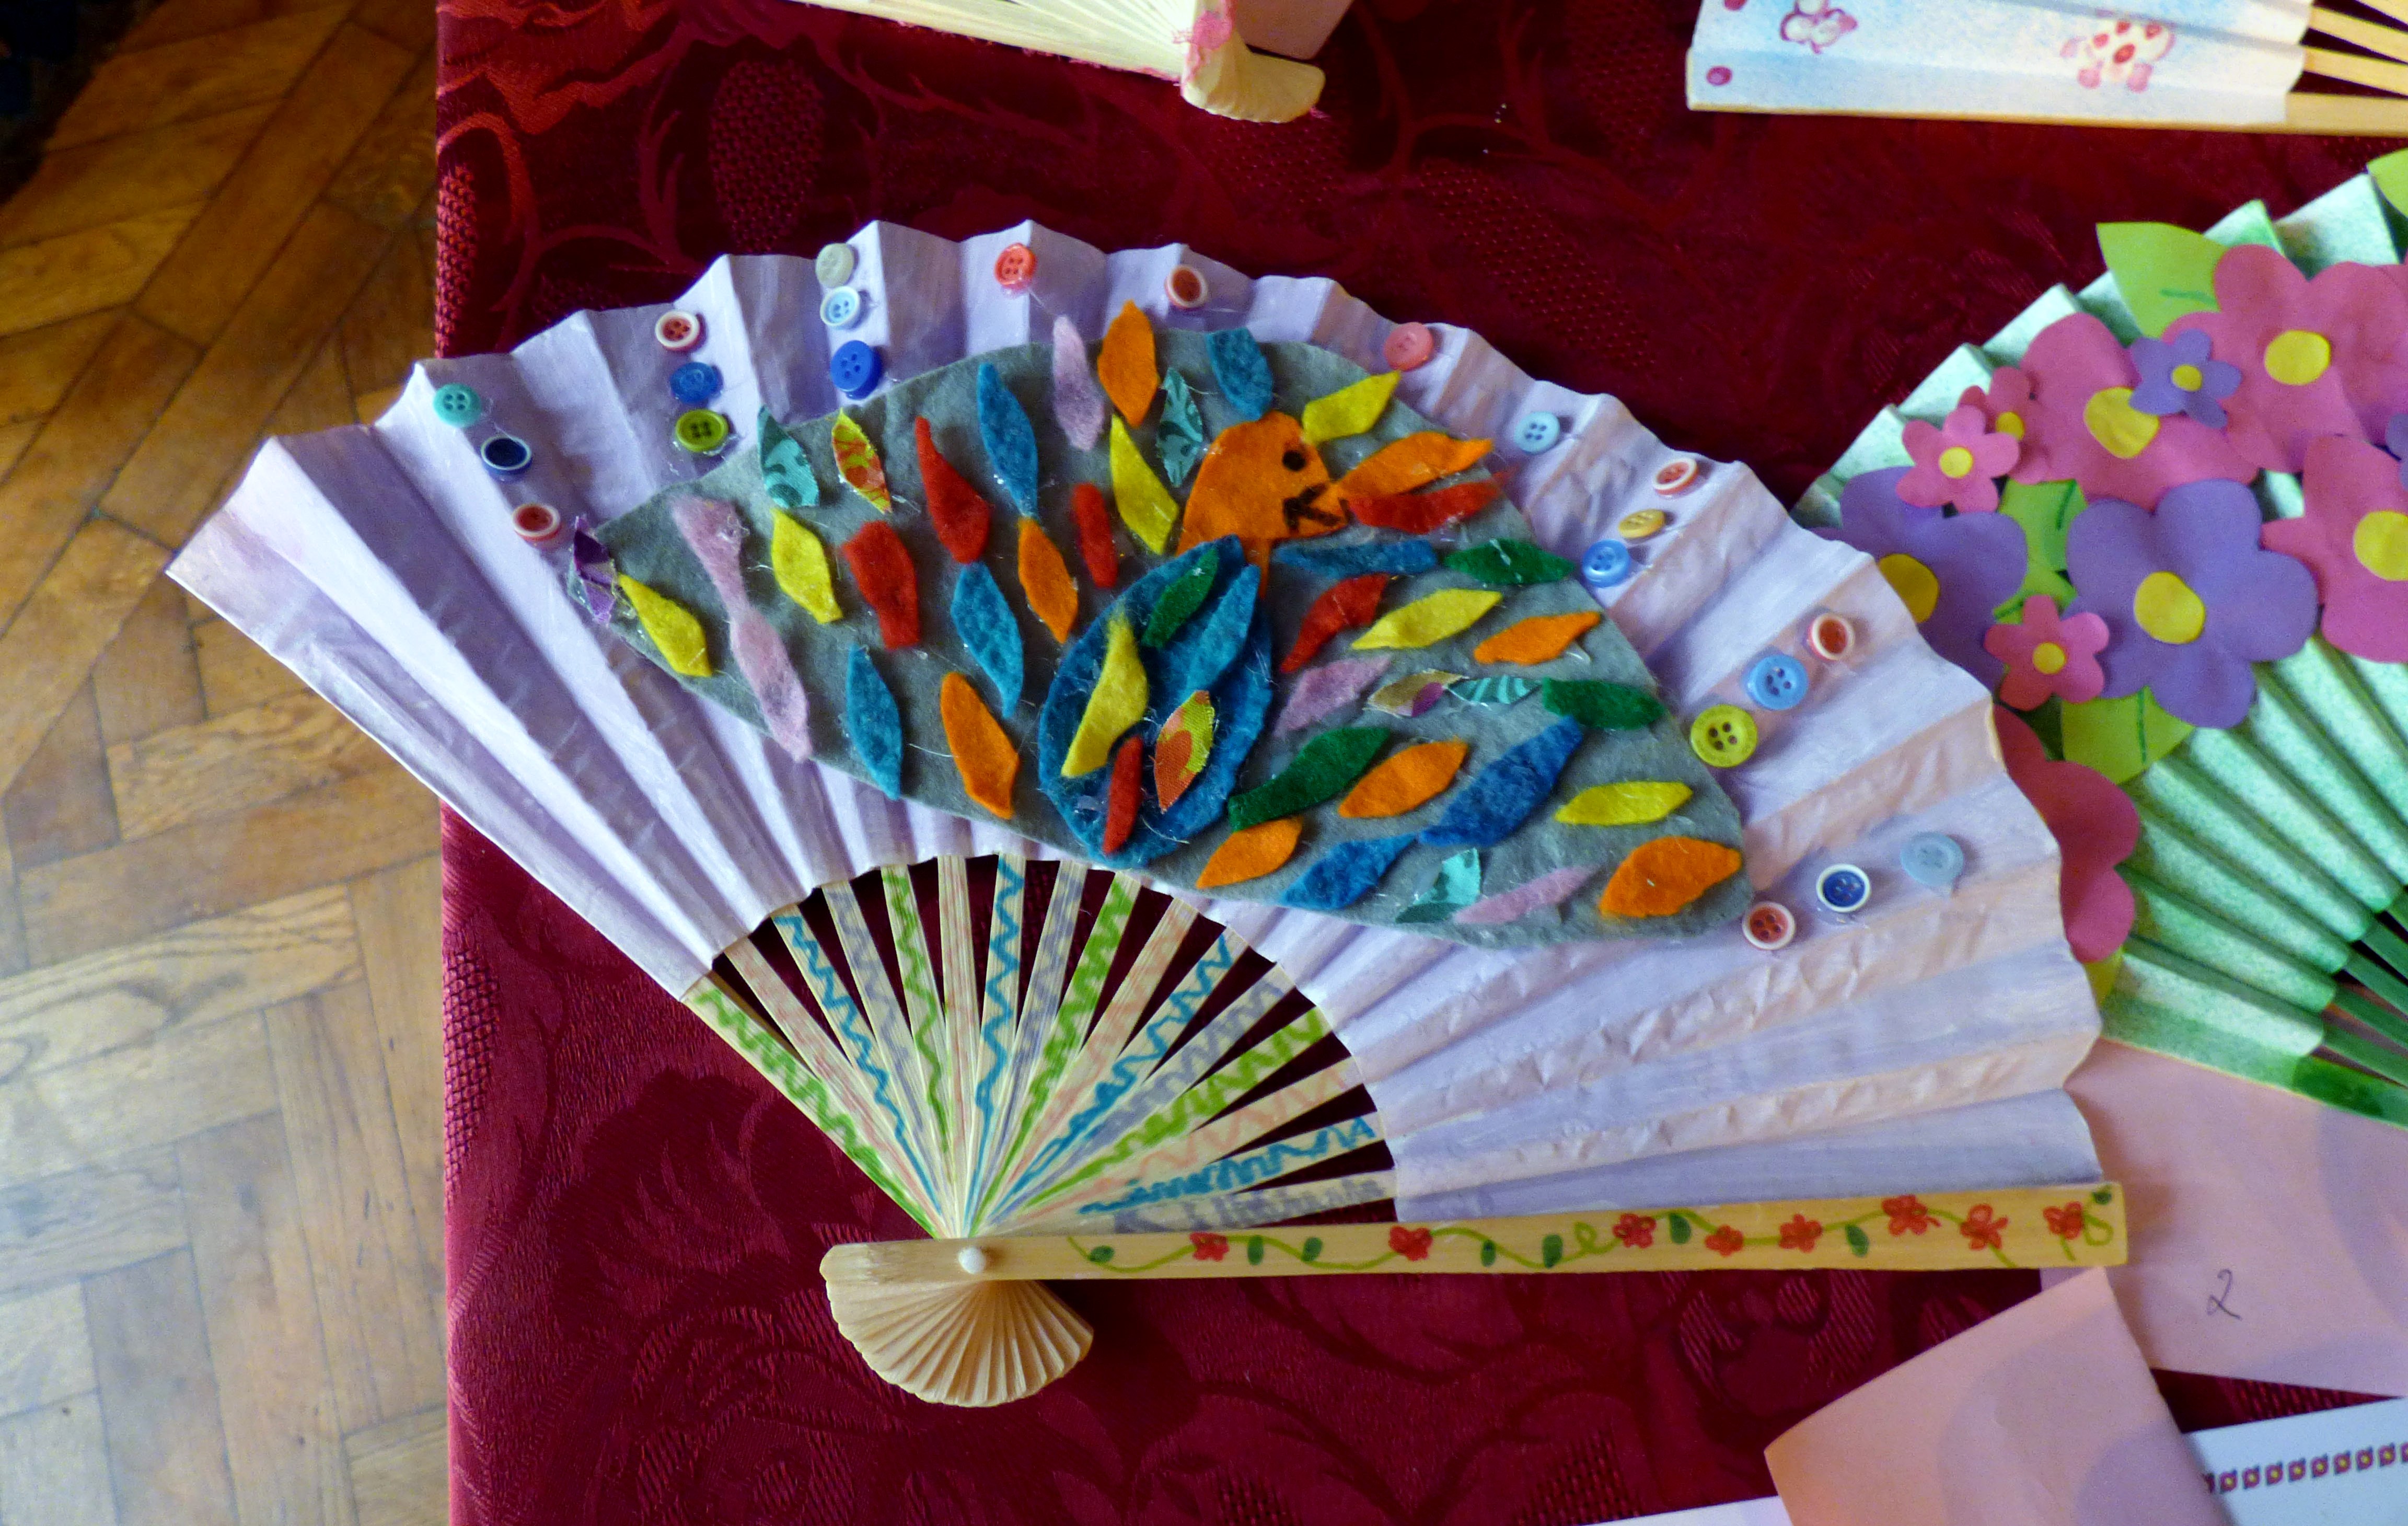 First Prize winning entry to "Decorate a Fan" competition for YE members at MEG Summer Tea Party 2016